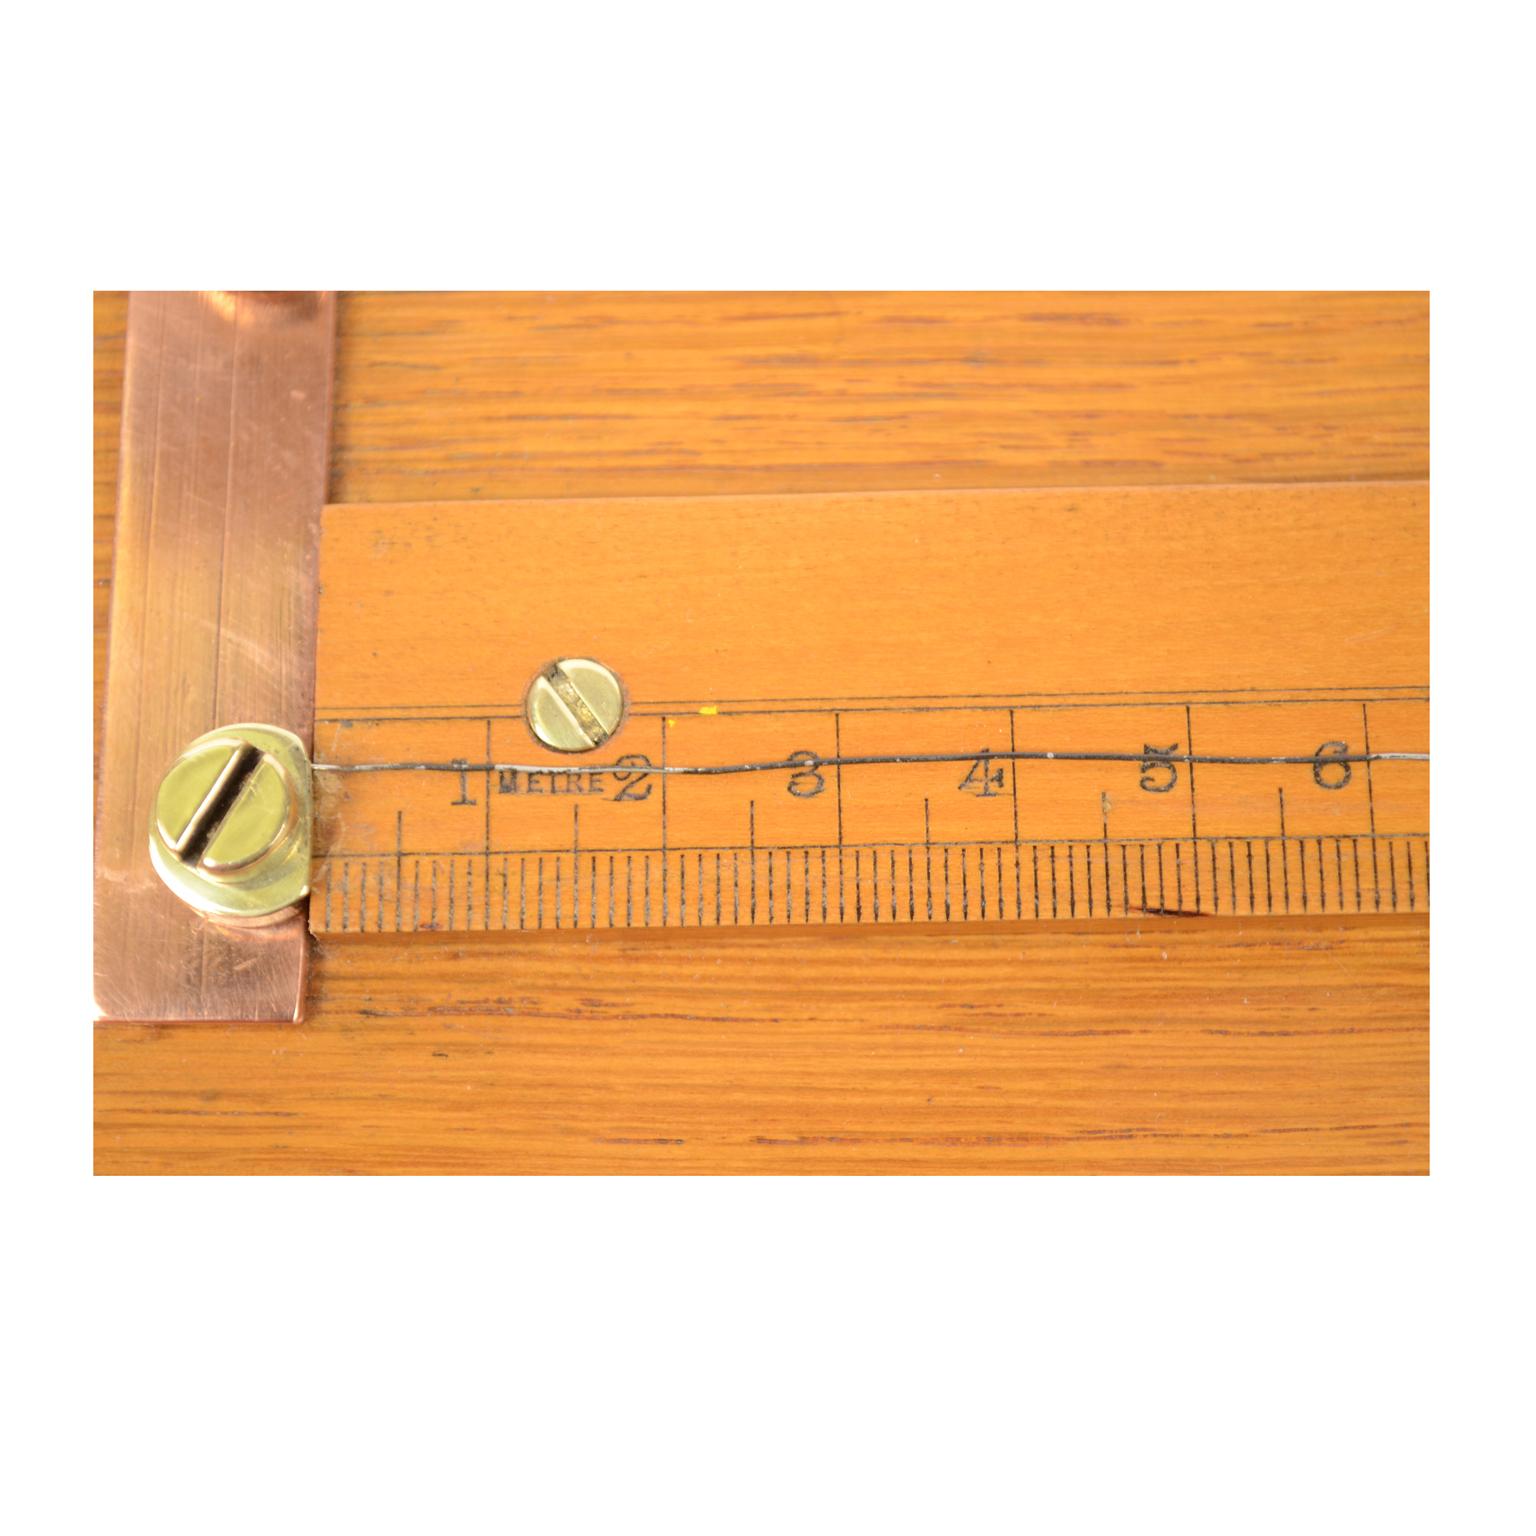 Resistance Measuring Device of the Second Half of the 19th Century 8